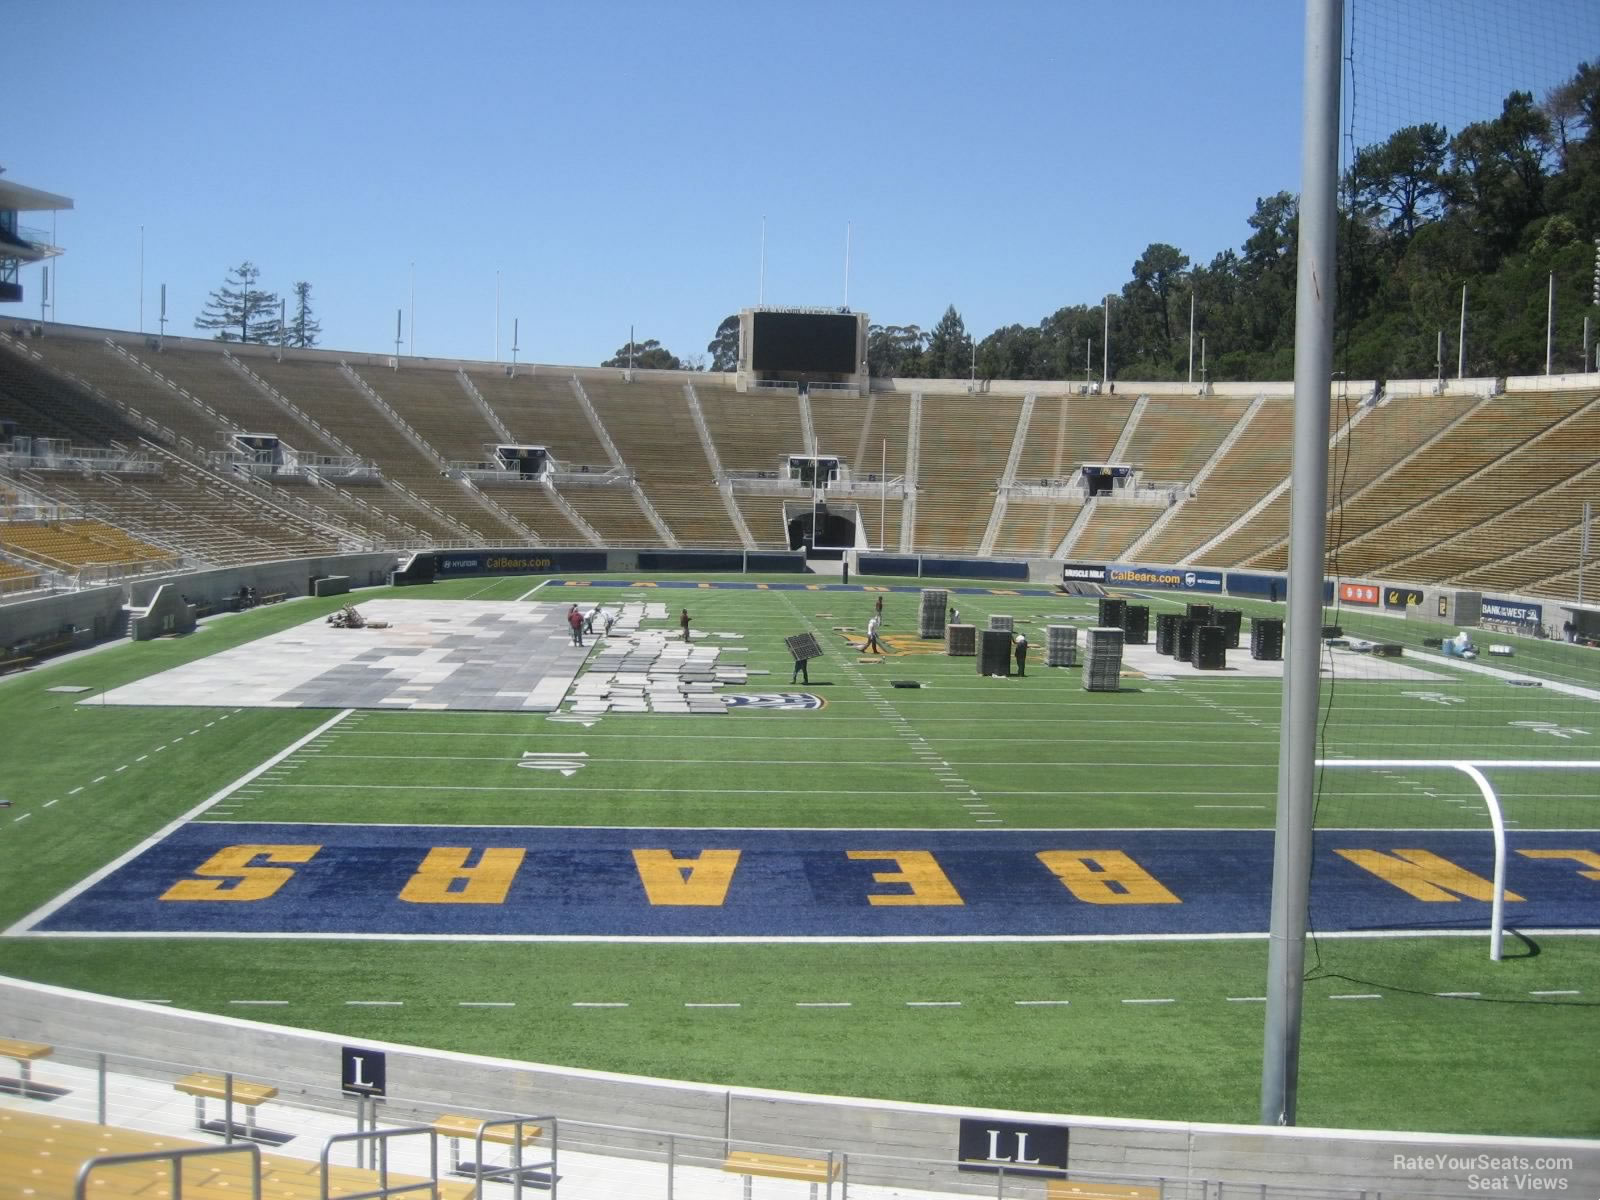 section ll, row 22 seat view  - memorial stadium (cal)